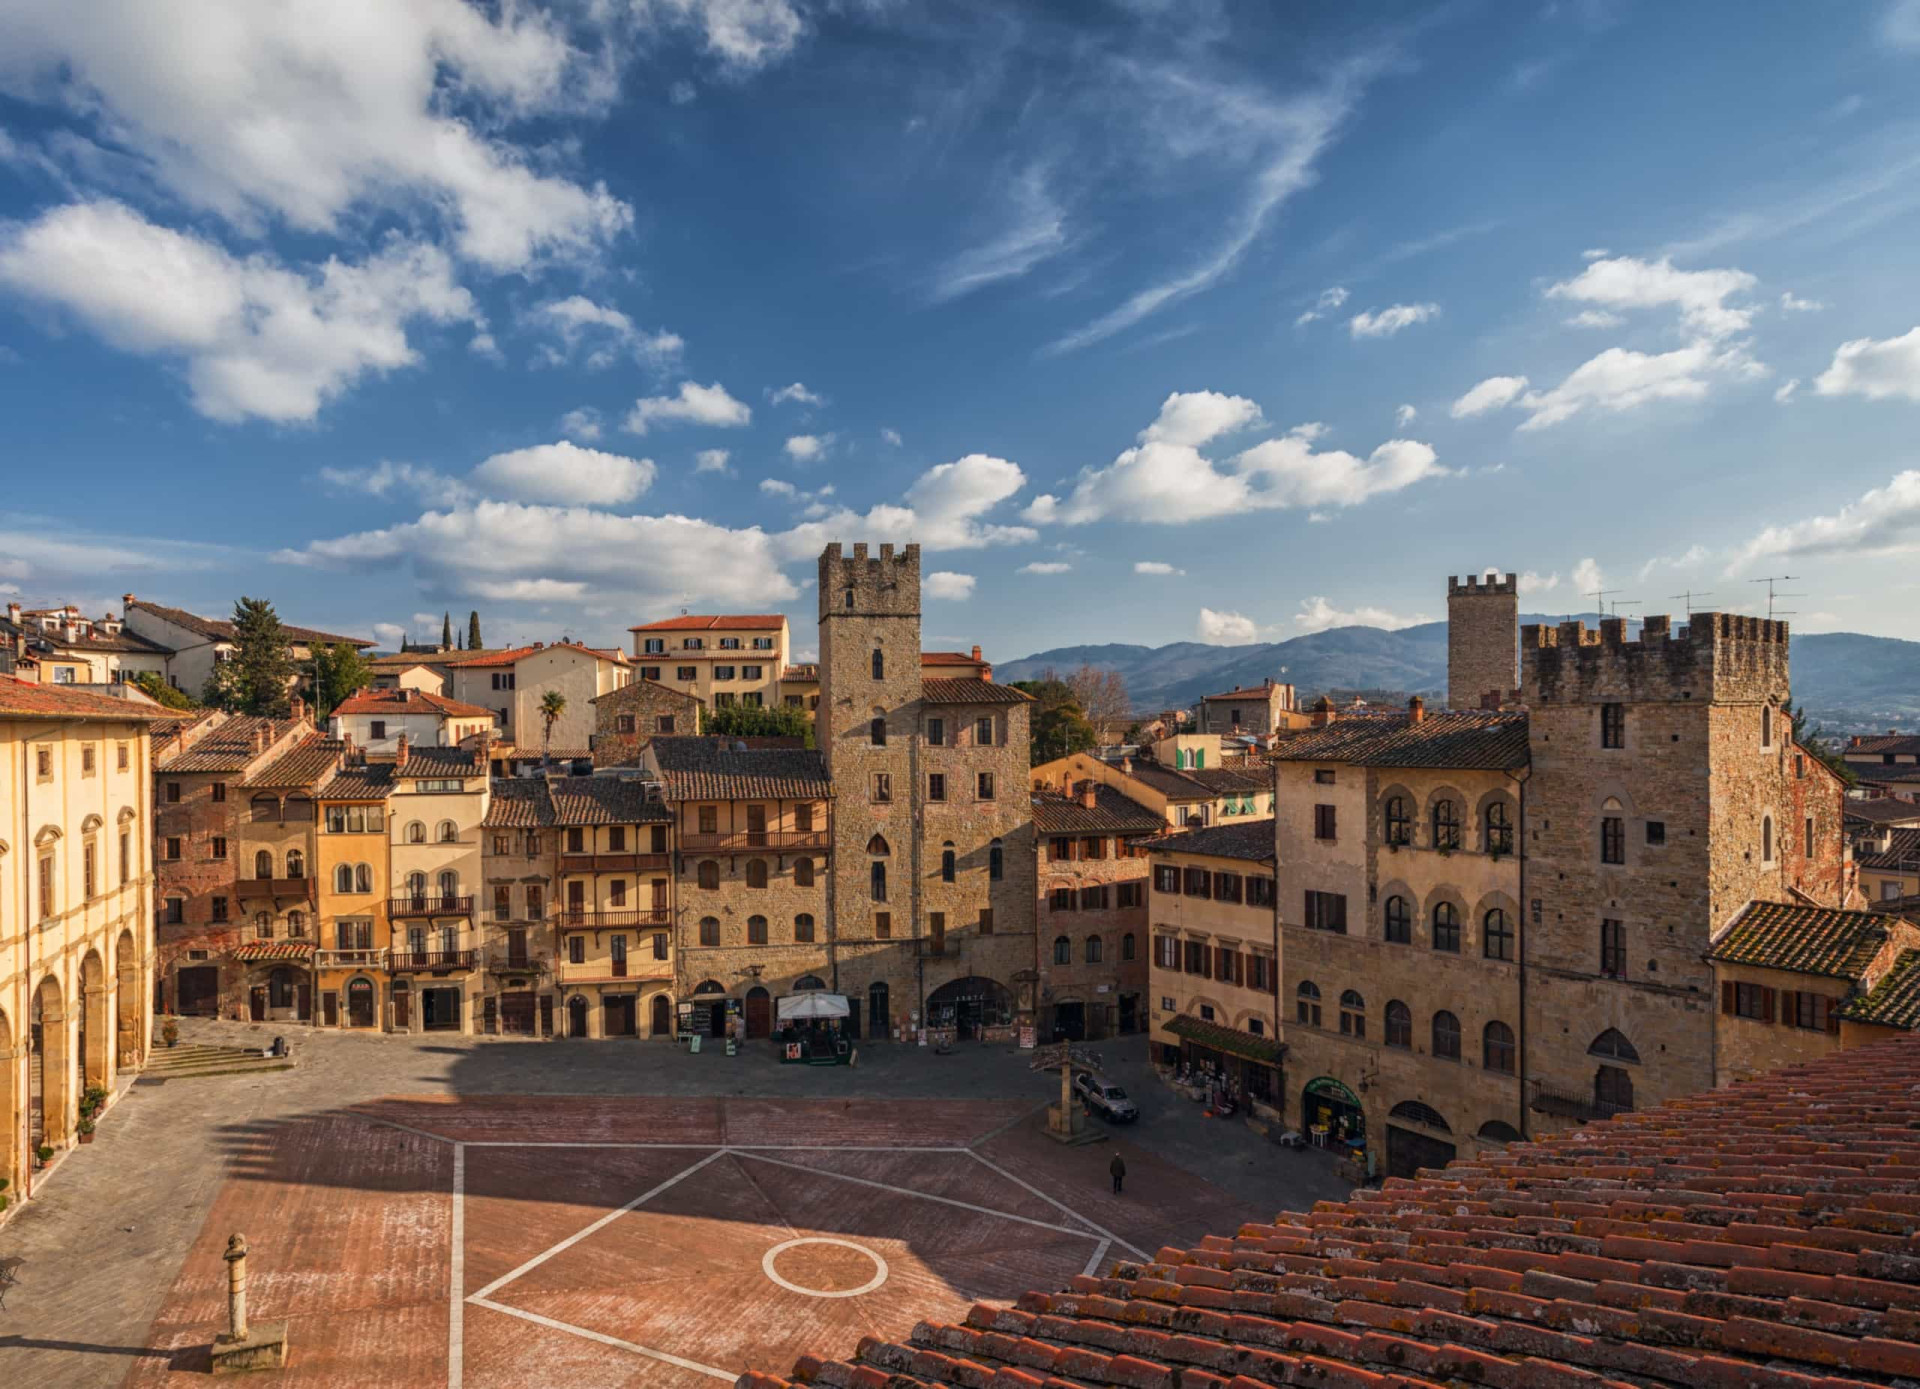 <p>The rural town of Arezzo is Etruscan in origin. Rich in history and possessed of a unique cultural heritage, Arezzo remains for the most part well below the tourist radar.</p><p>You may also like:<a href="https://www.starsinsider.com/n/375906?utm_source=msn.com&utm_medium=display&utm_campaign=referral_description&utm_content=481361v4en-en_selected"> Get in shape in 30 days with these 7-minute workouts </a></p>